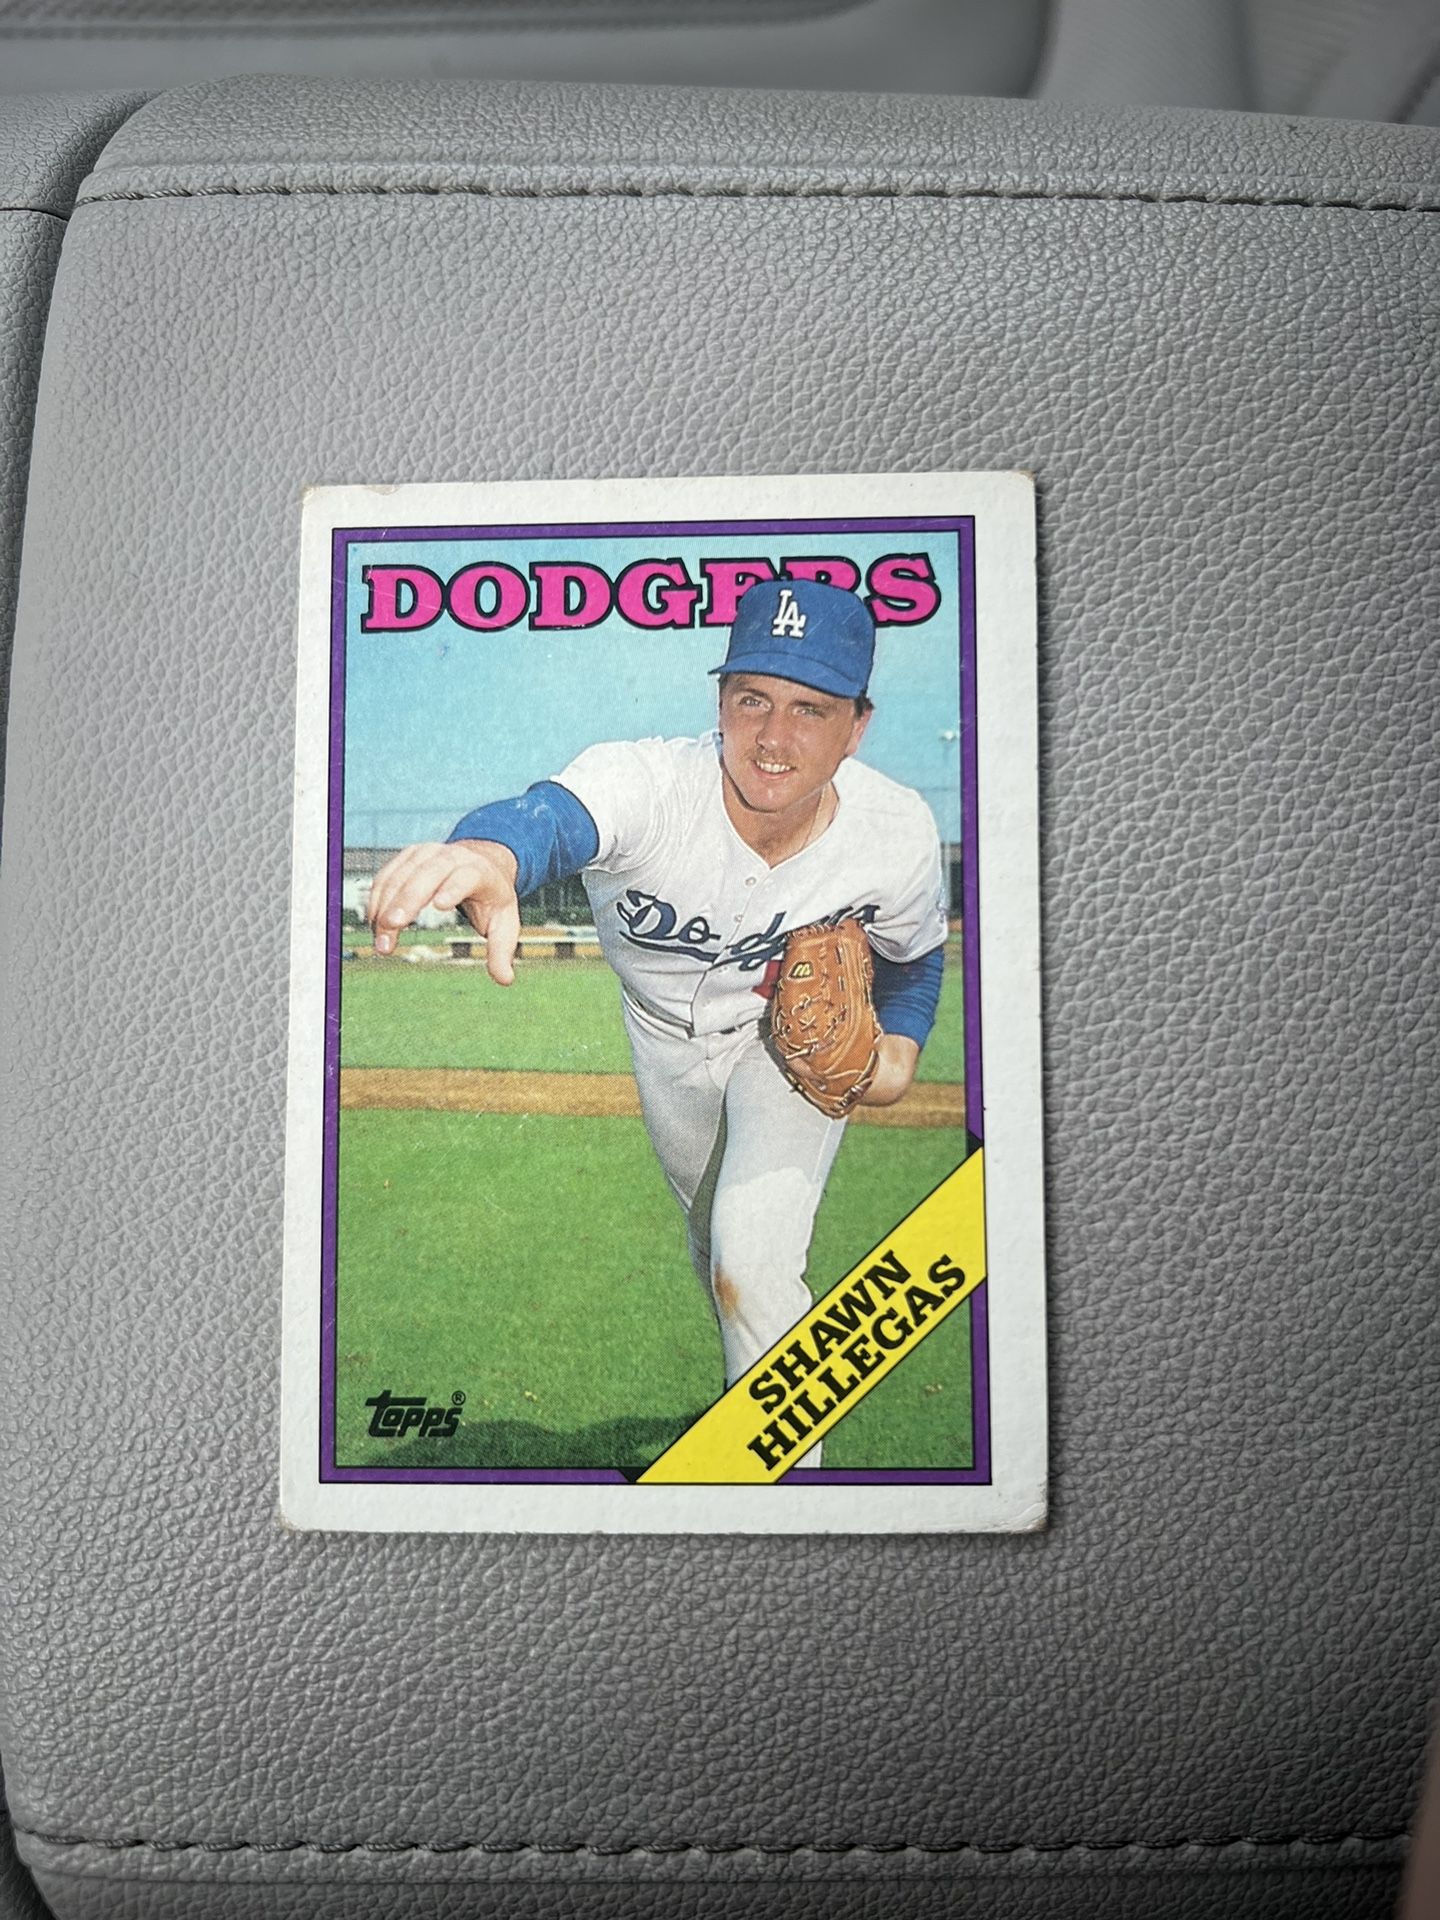 1988 Topps Shawn Hillegas Los Angeles Dodgers #455 Rookie Baseball Card (Give An Offer)